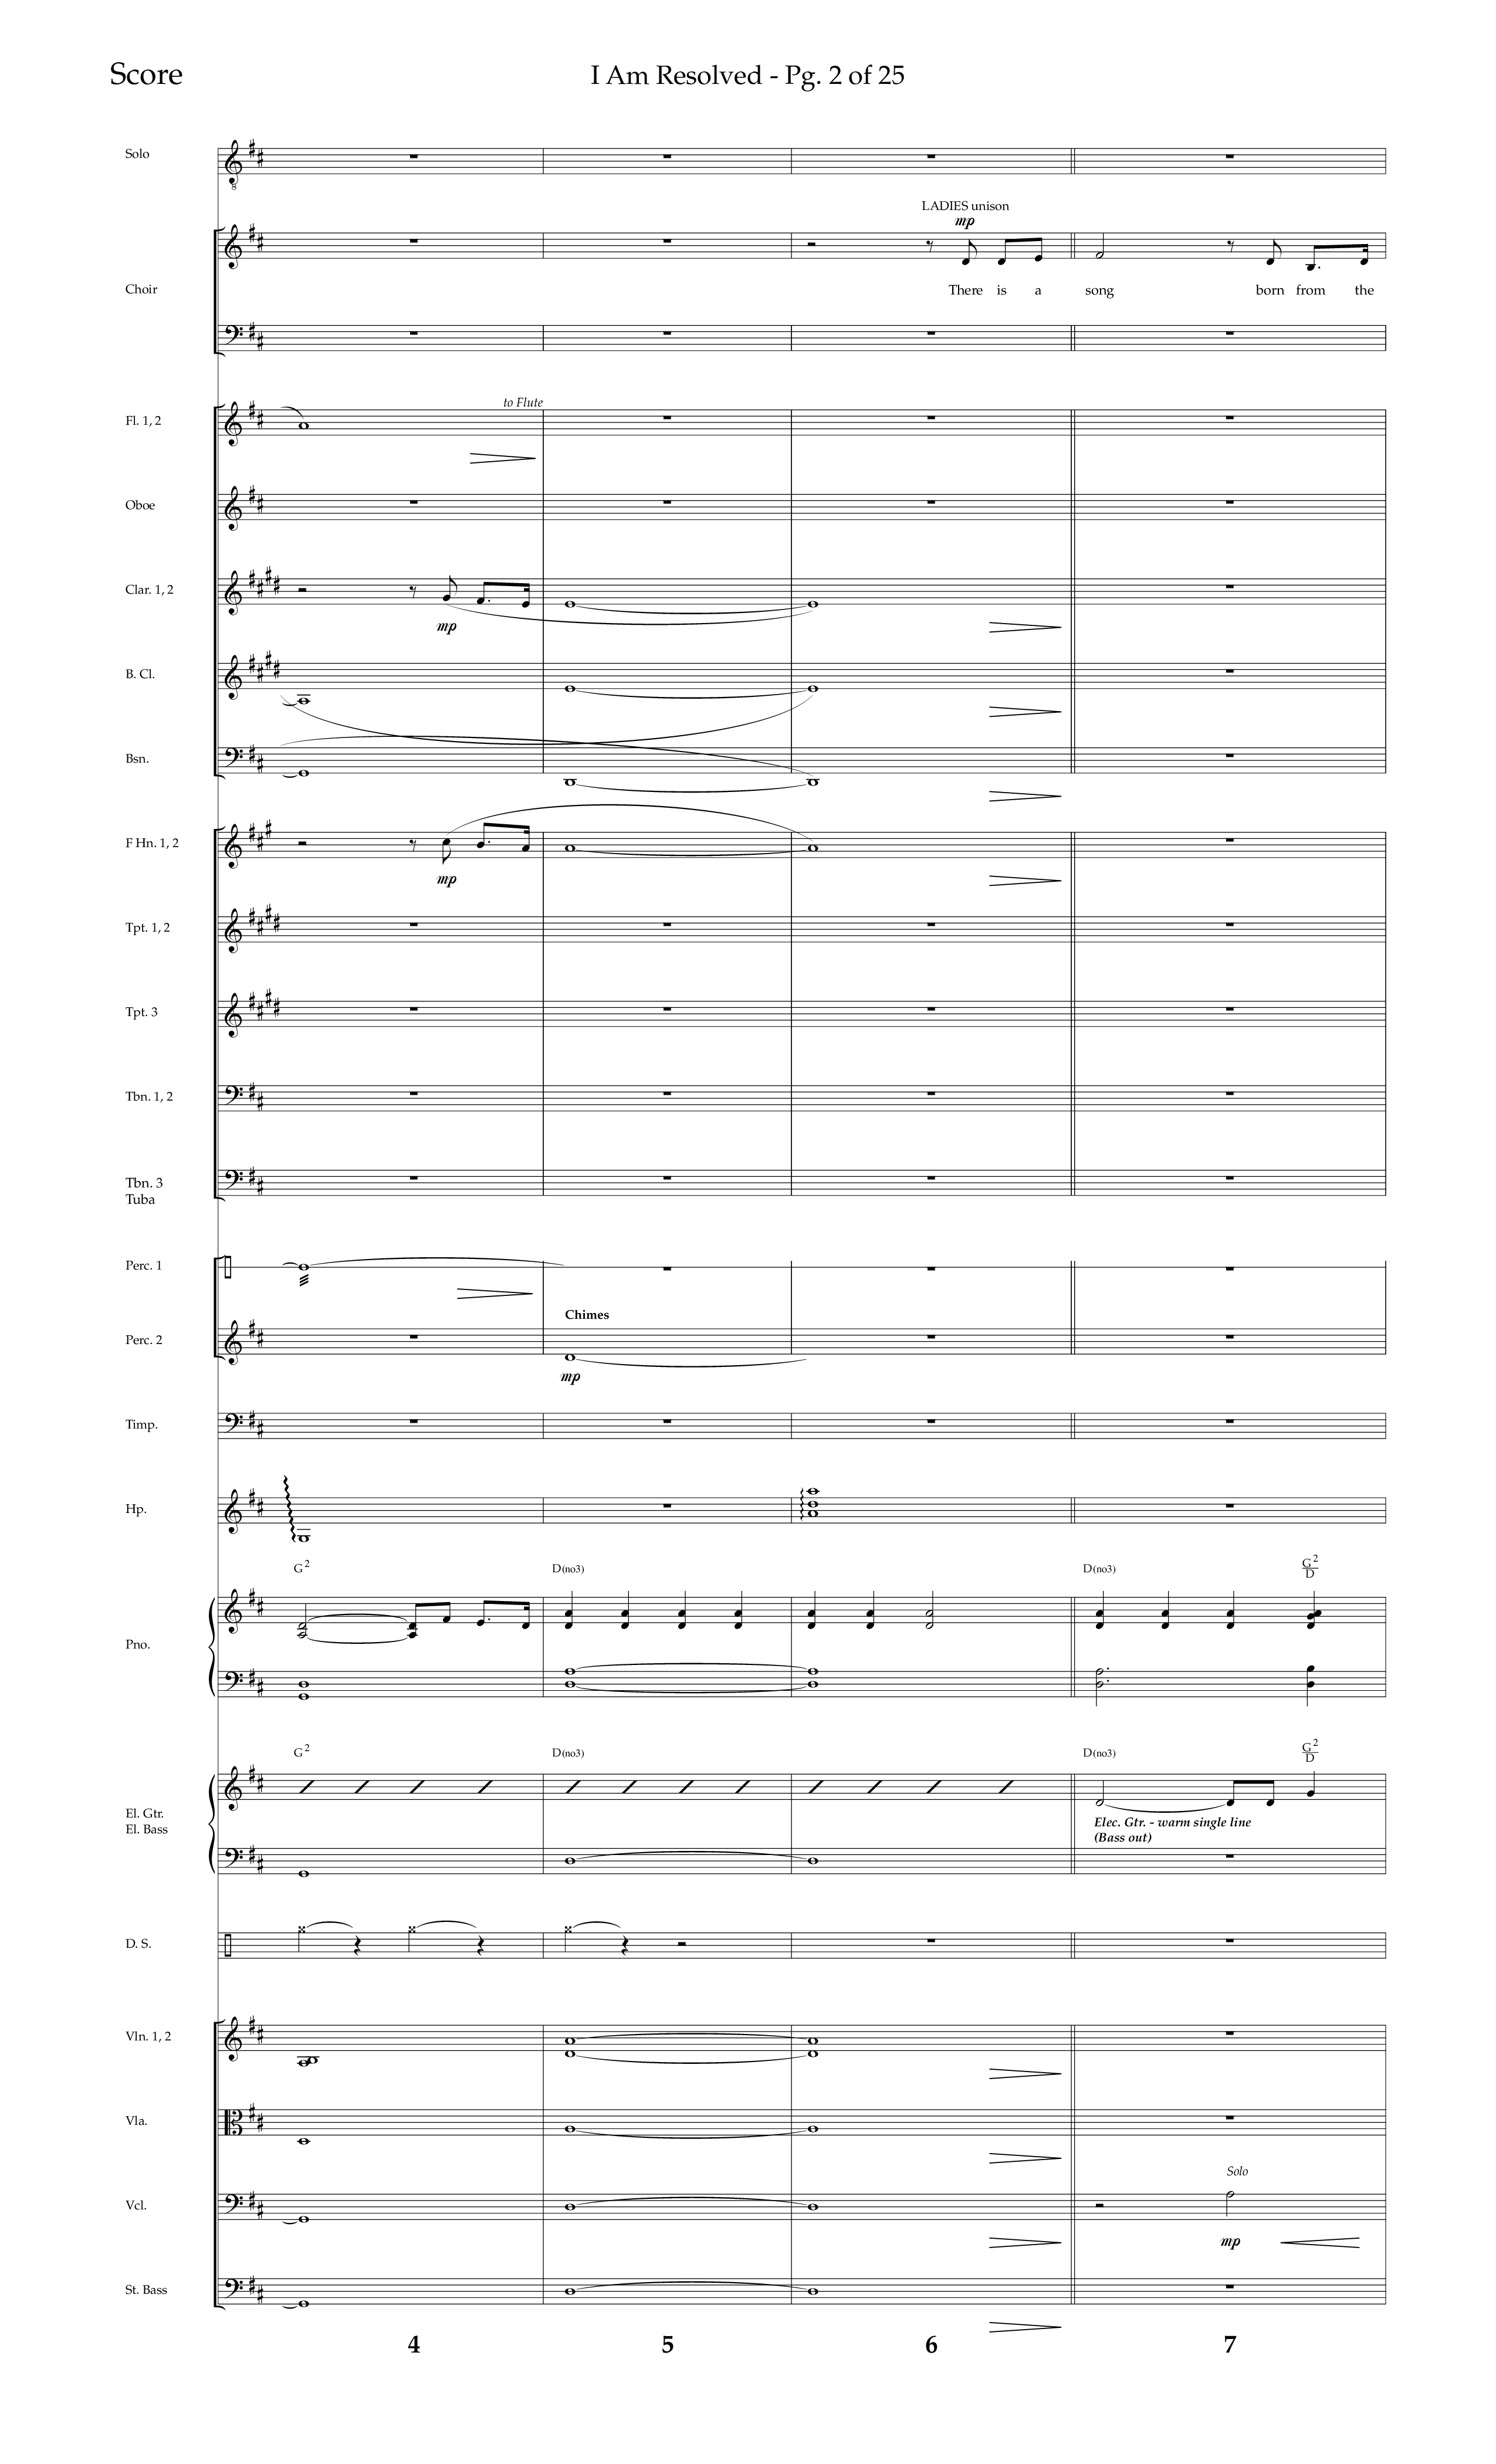 I Am Resolved (with I Have Decided To Follow Jesus) (Choral Anthem SATB) Conductor's Score (Lifeway Choral / Arr. John Bolin / Orch. Richard Kingsmore)